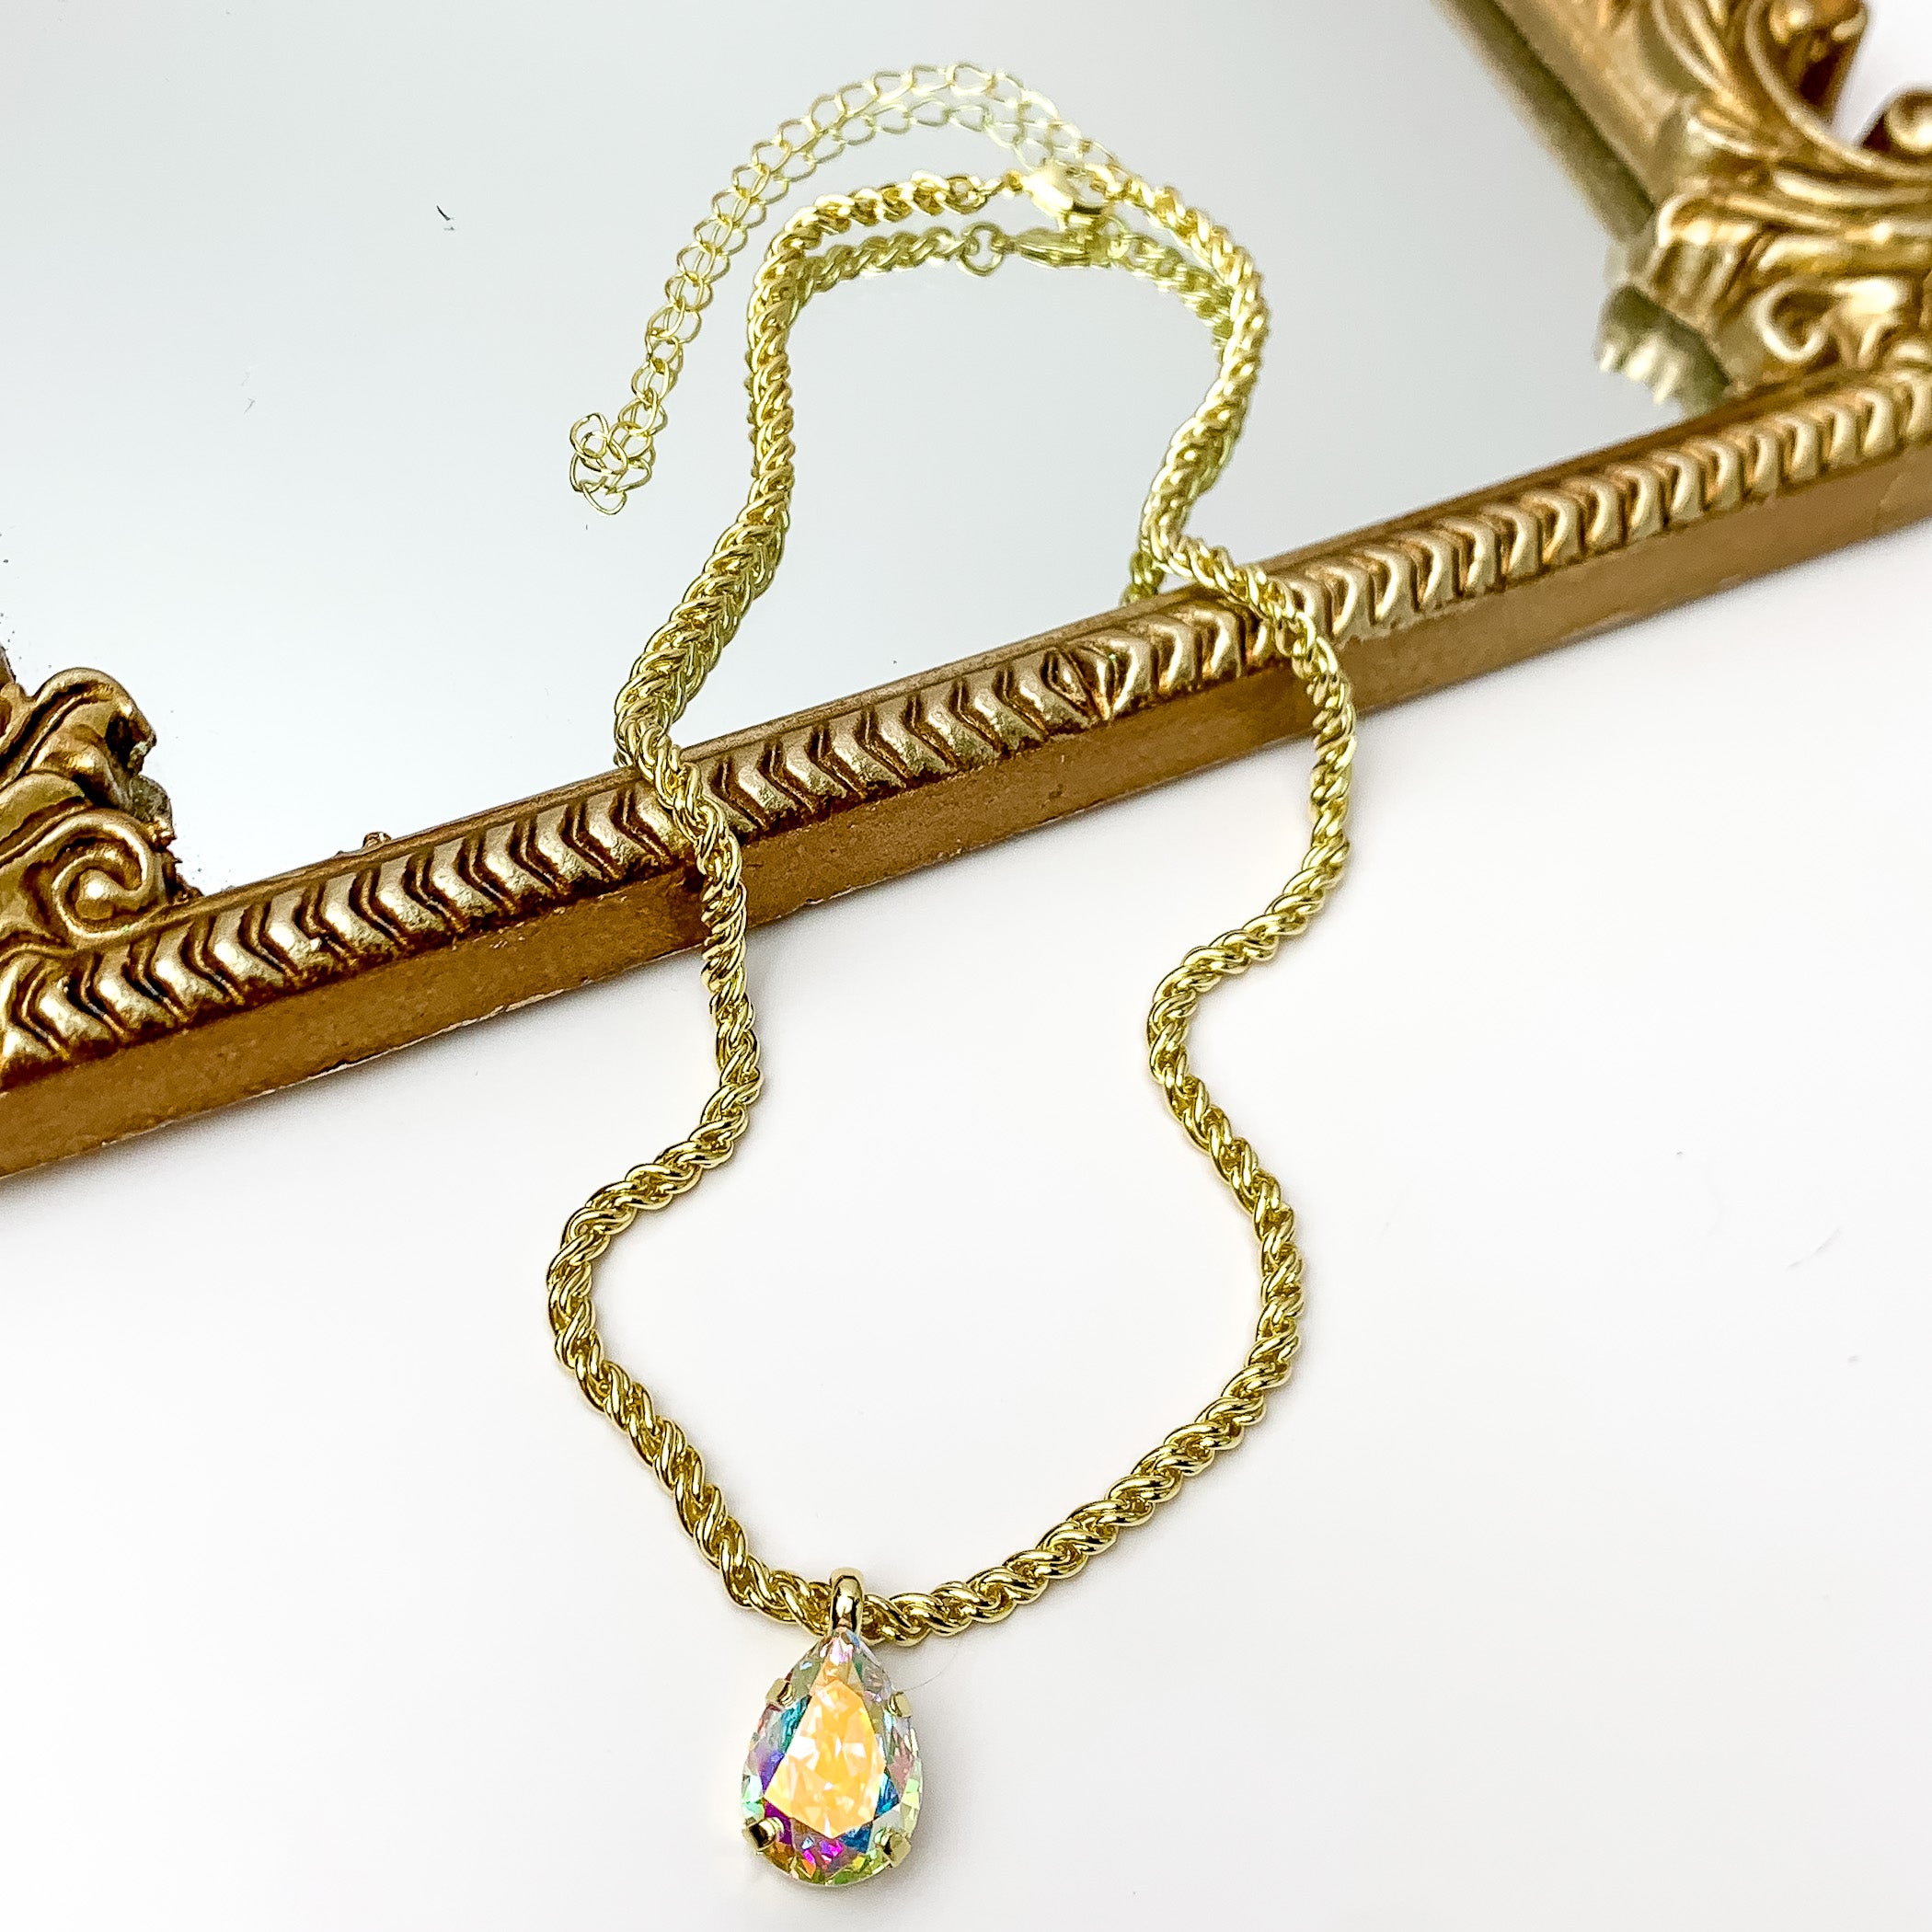 Pictured is a gold chain necklace with ab crystal teardrop charm. This necklace is pictured partially laying on a gold mirror on a white background.    